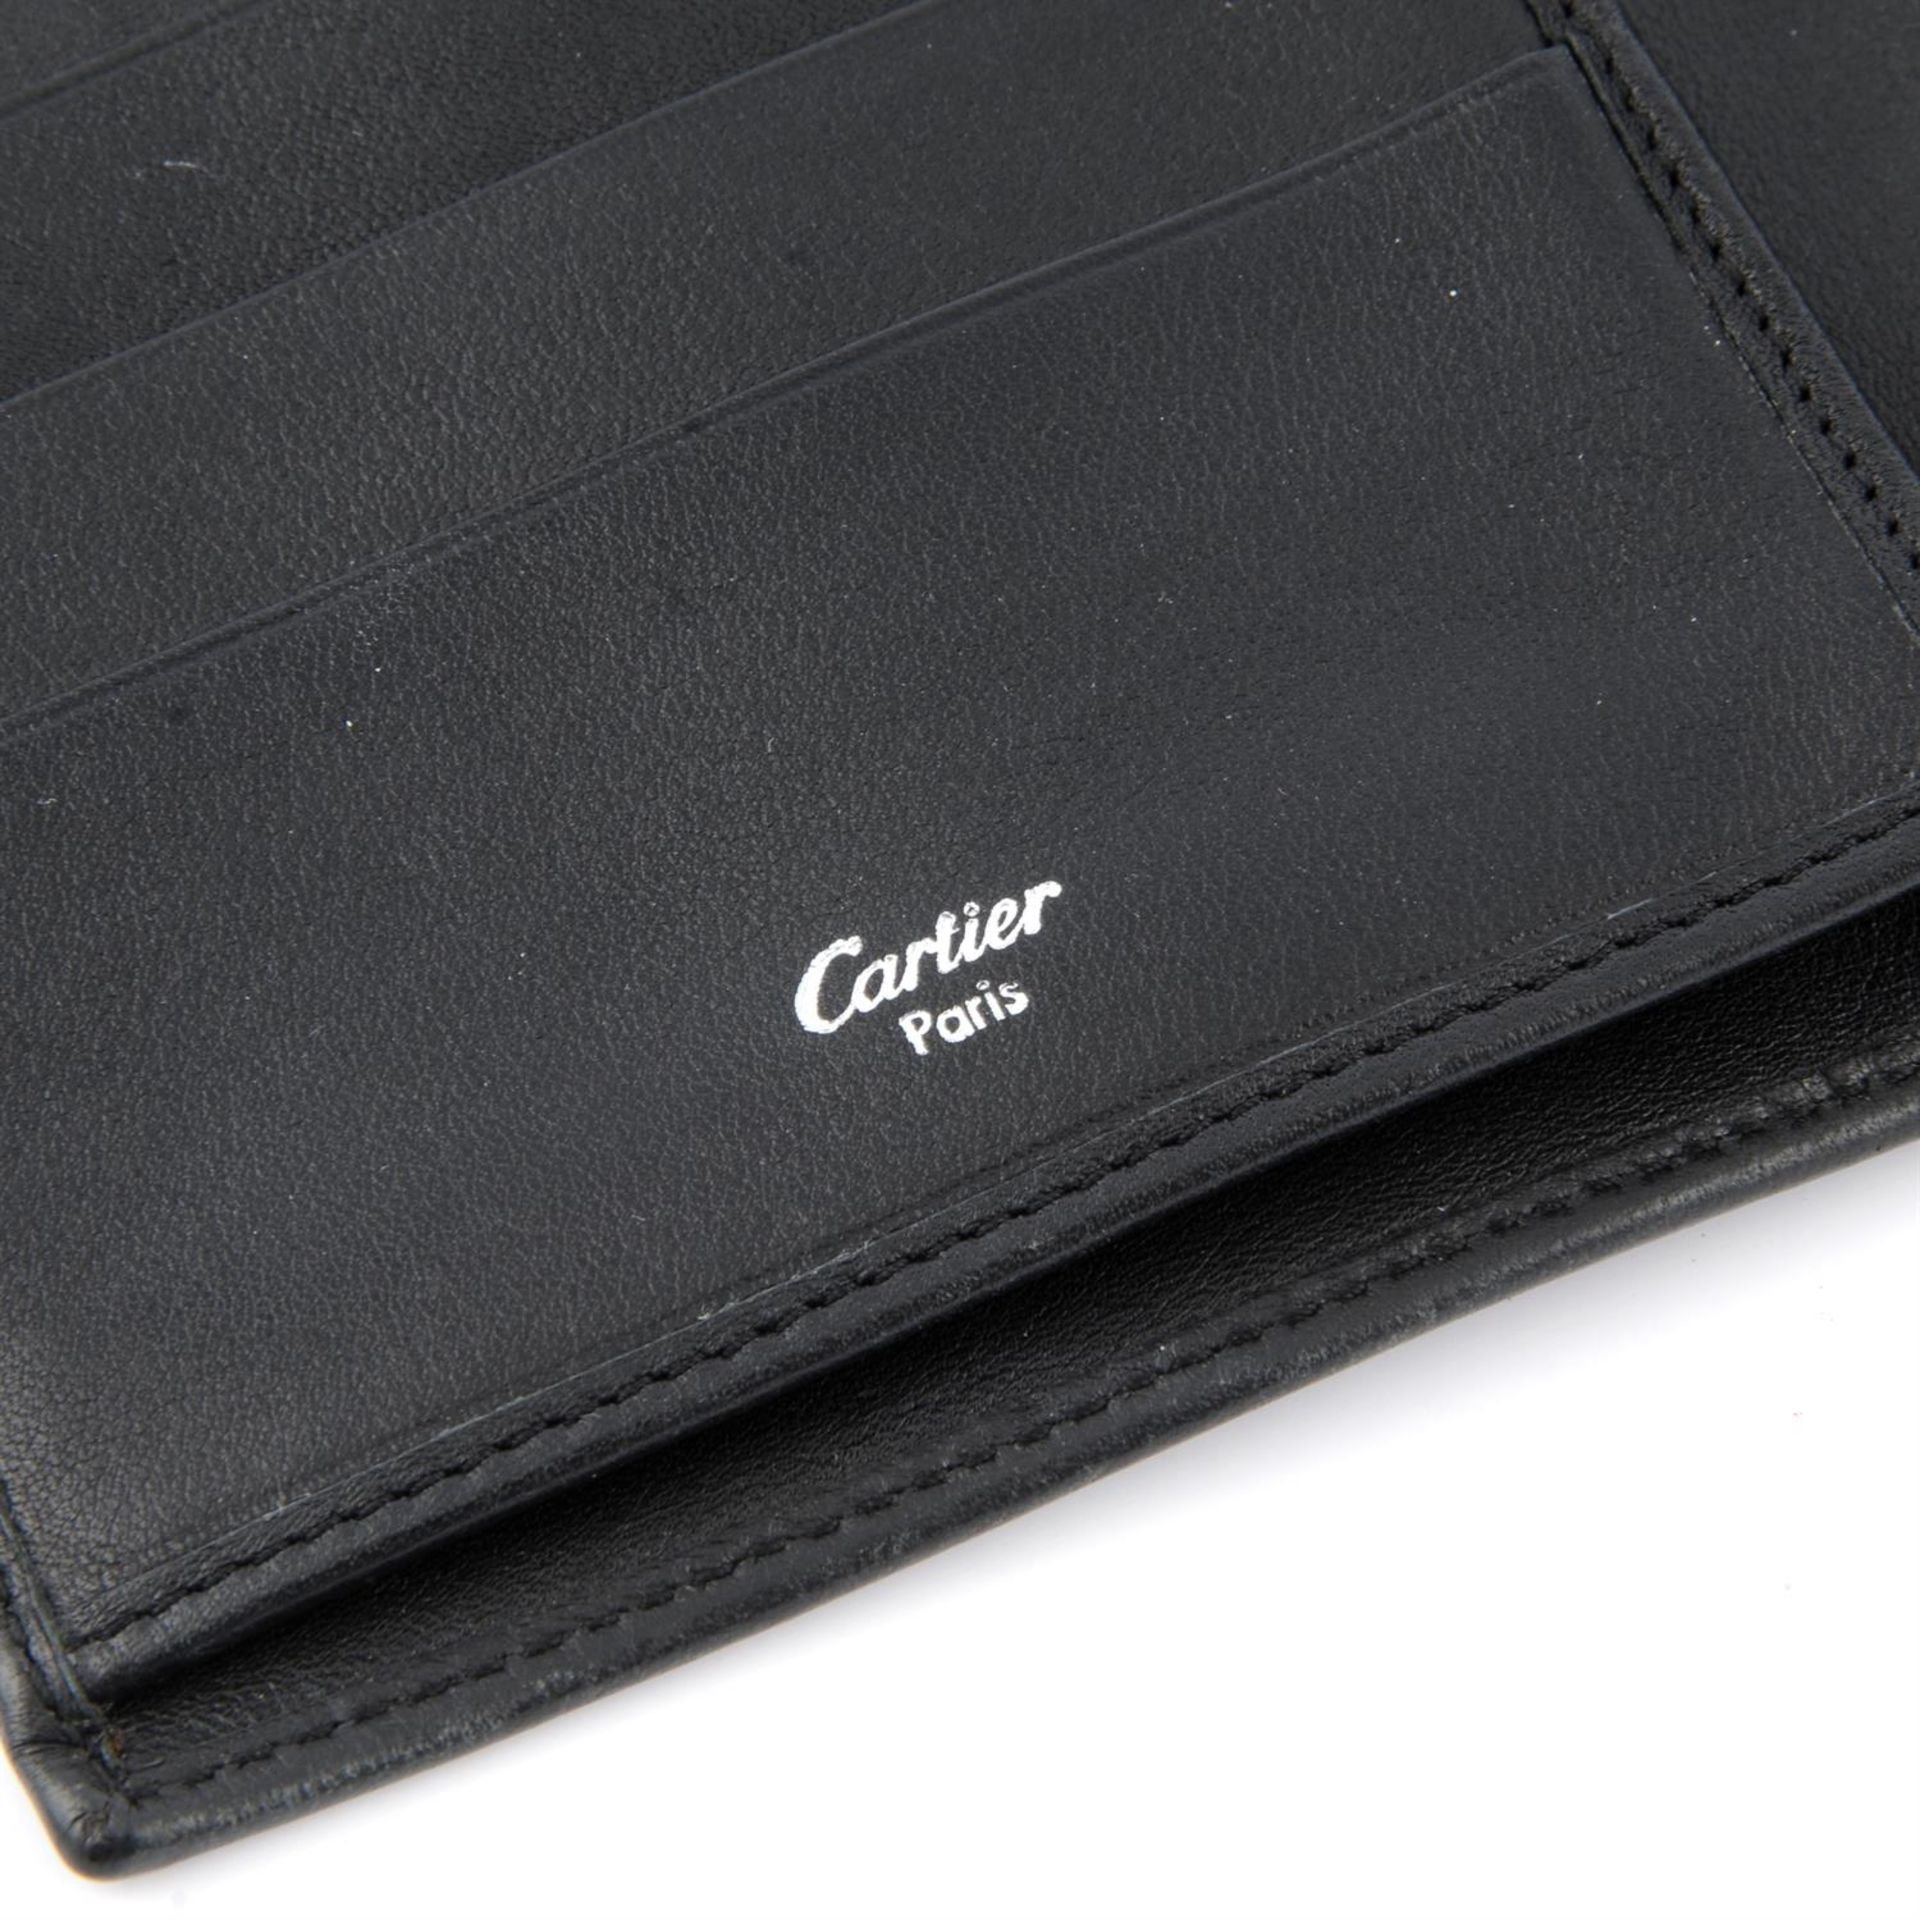 CARTIER - a black leather tri fold Trinity wallet. - Image 4 of 4